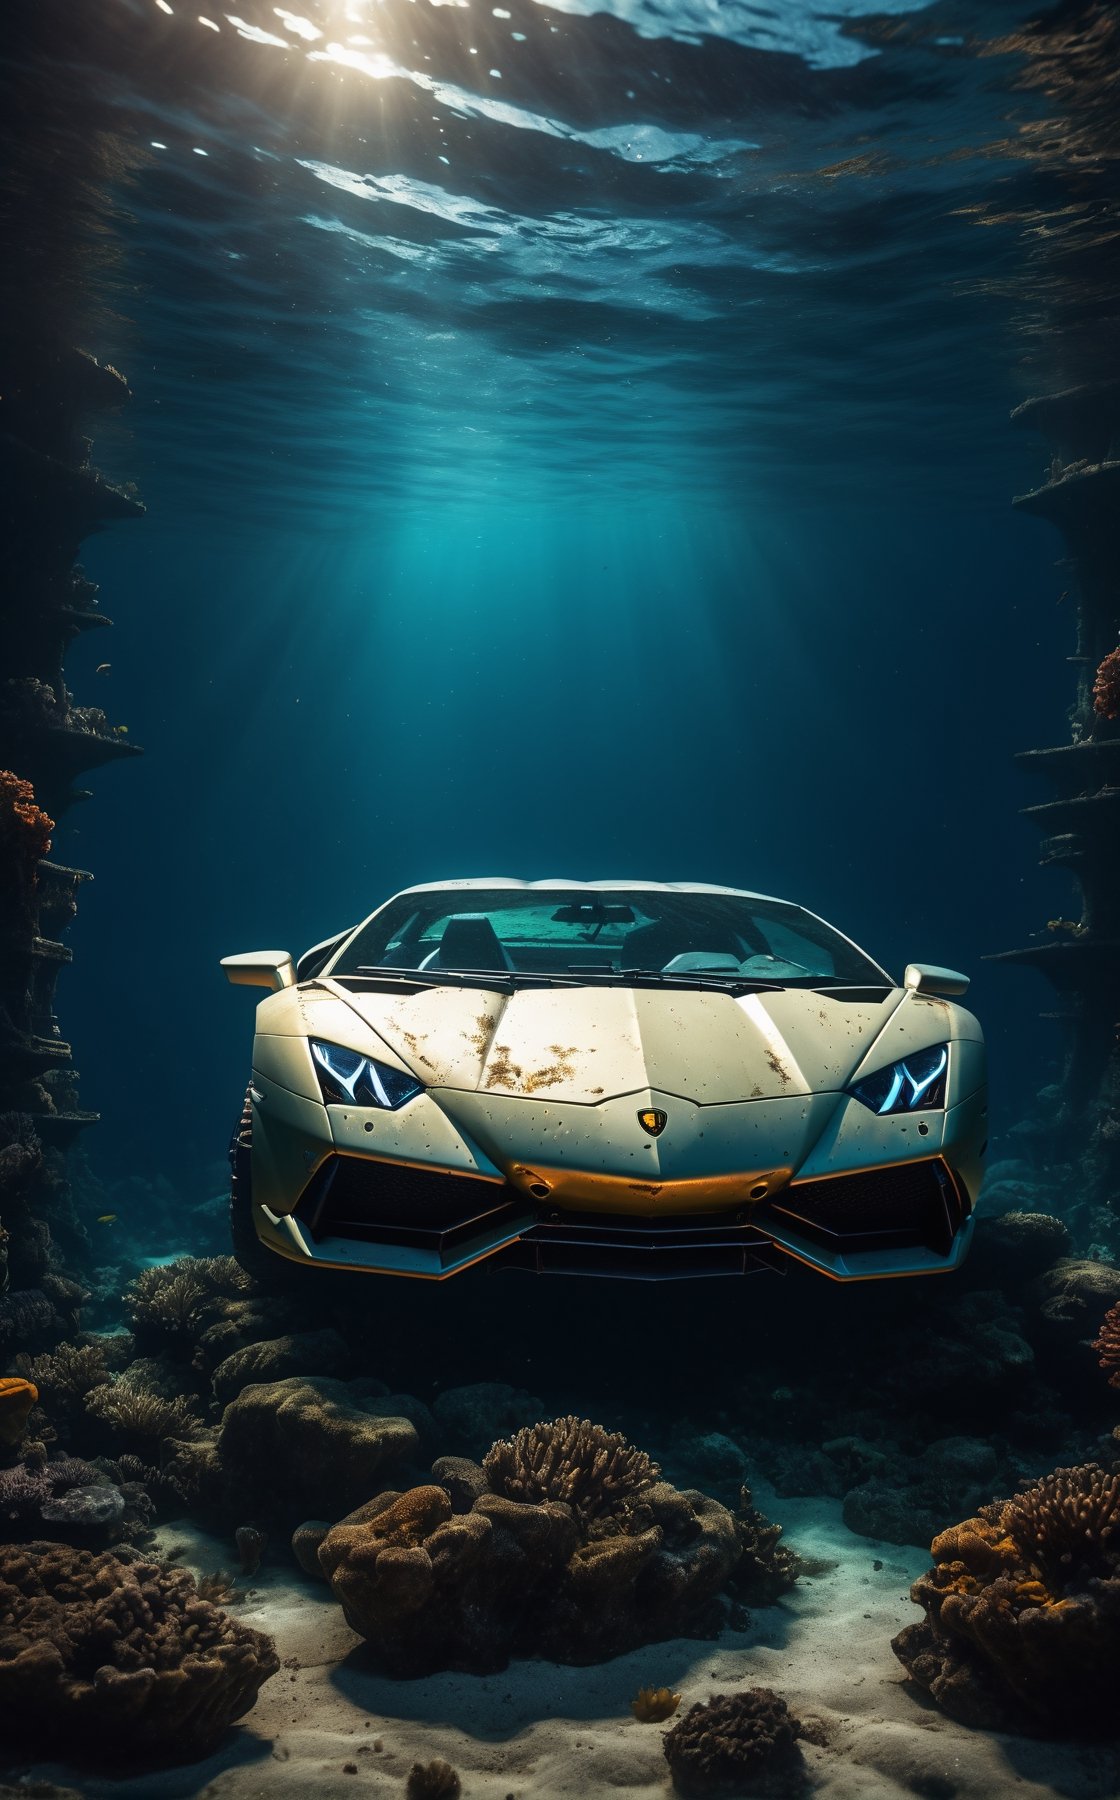 the abandoned Lamborghini sank to the bottom of the sea, no water surface, broken car, spooky deep sea, spooky around, masterpiece, ultra high quality, ultra high resolution, ultra realistic, coral, ultra reflection, detailed background, dark background, shark back, low key, dark tone, 8k